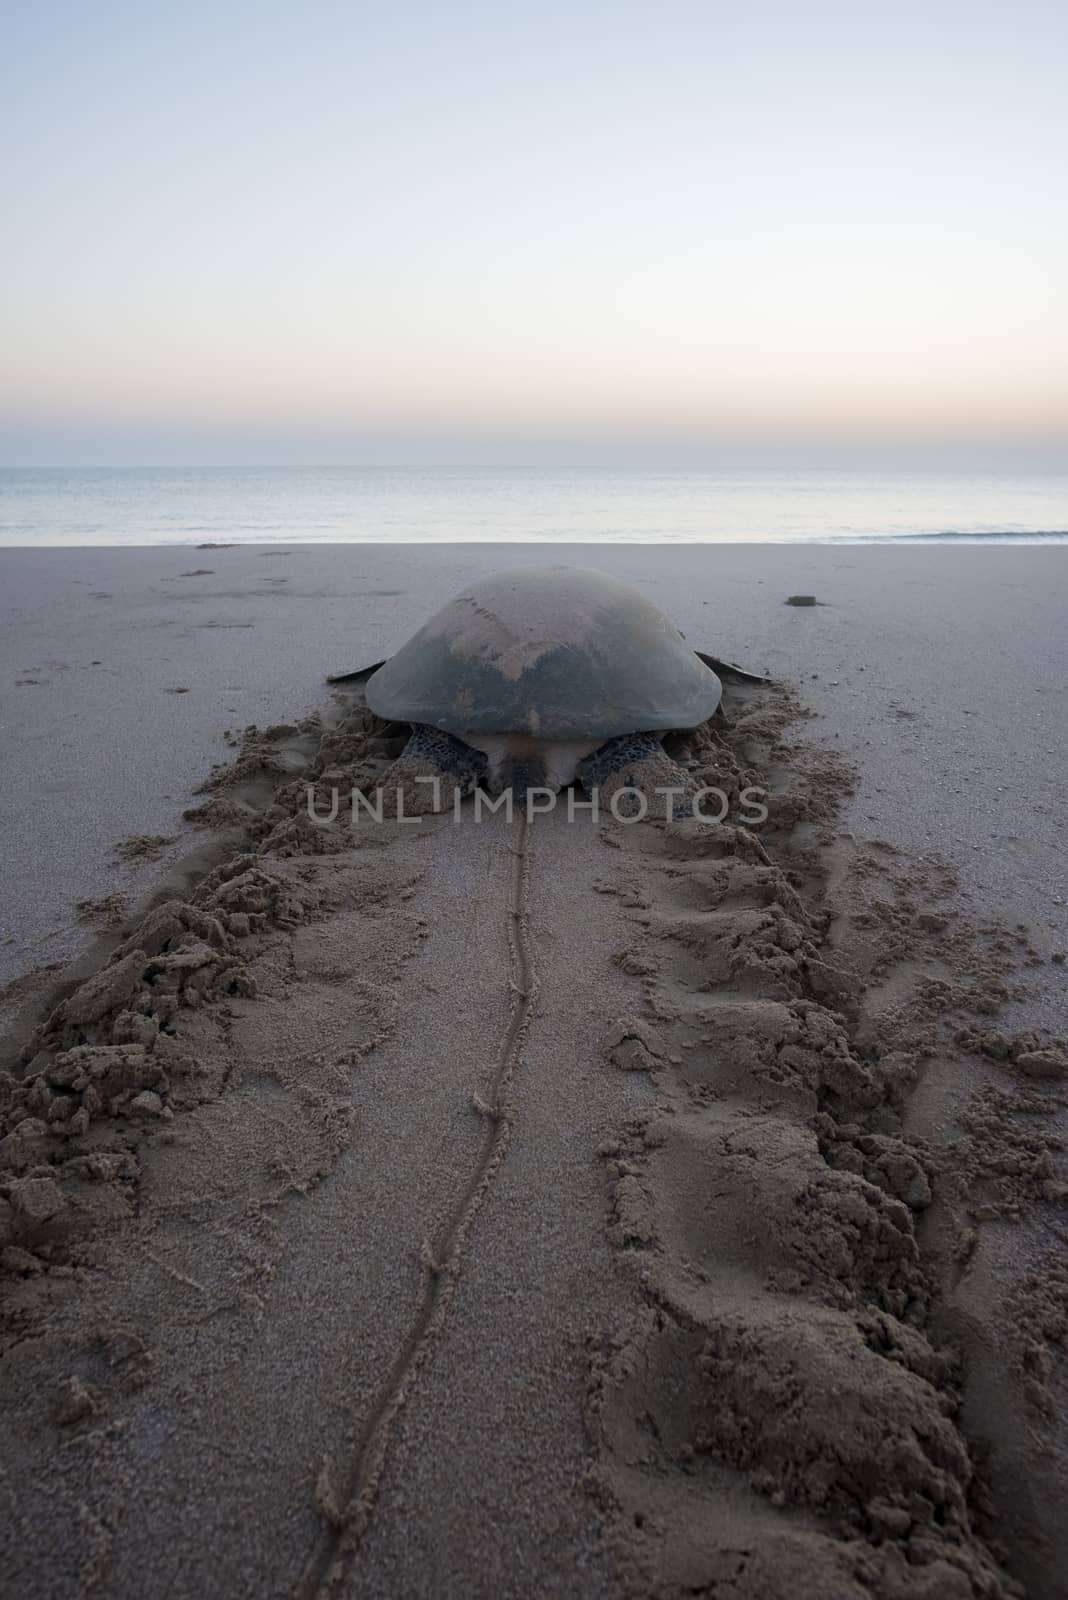 Exhausted Sea turle after nesting in Ras Al Hadd, Oman by GABIS